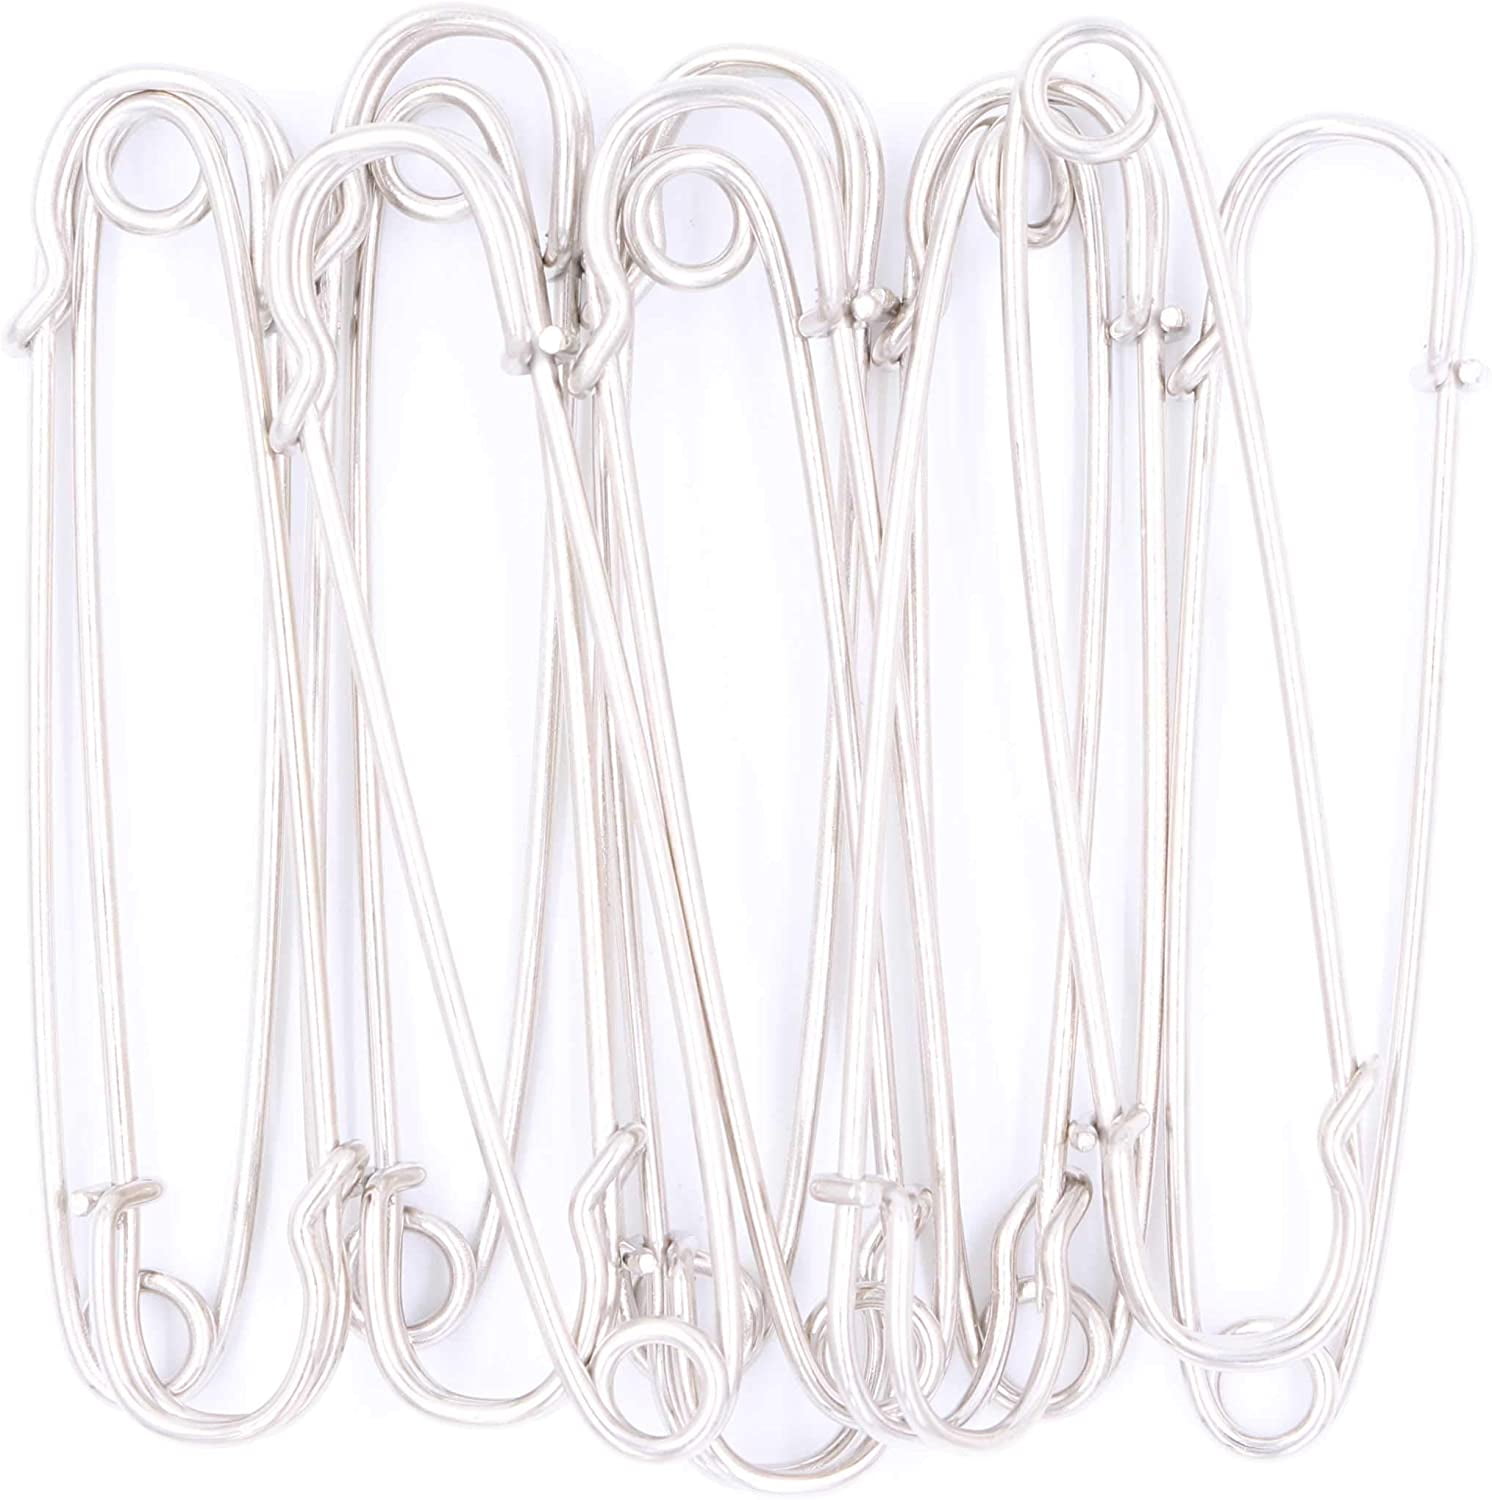 Silver 20 Pieces 4 Inch Large Safety Pins Heavy Duty Safety Pins Stainless Steel Large Safety Pins Assorted for Diaper Blankets Mattress Covers Backpacks Kilts 